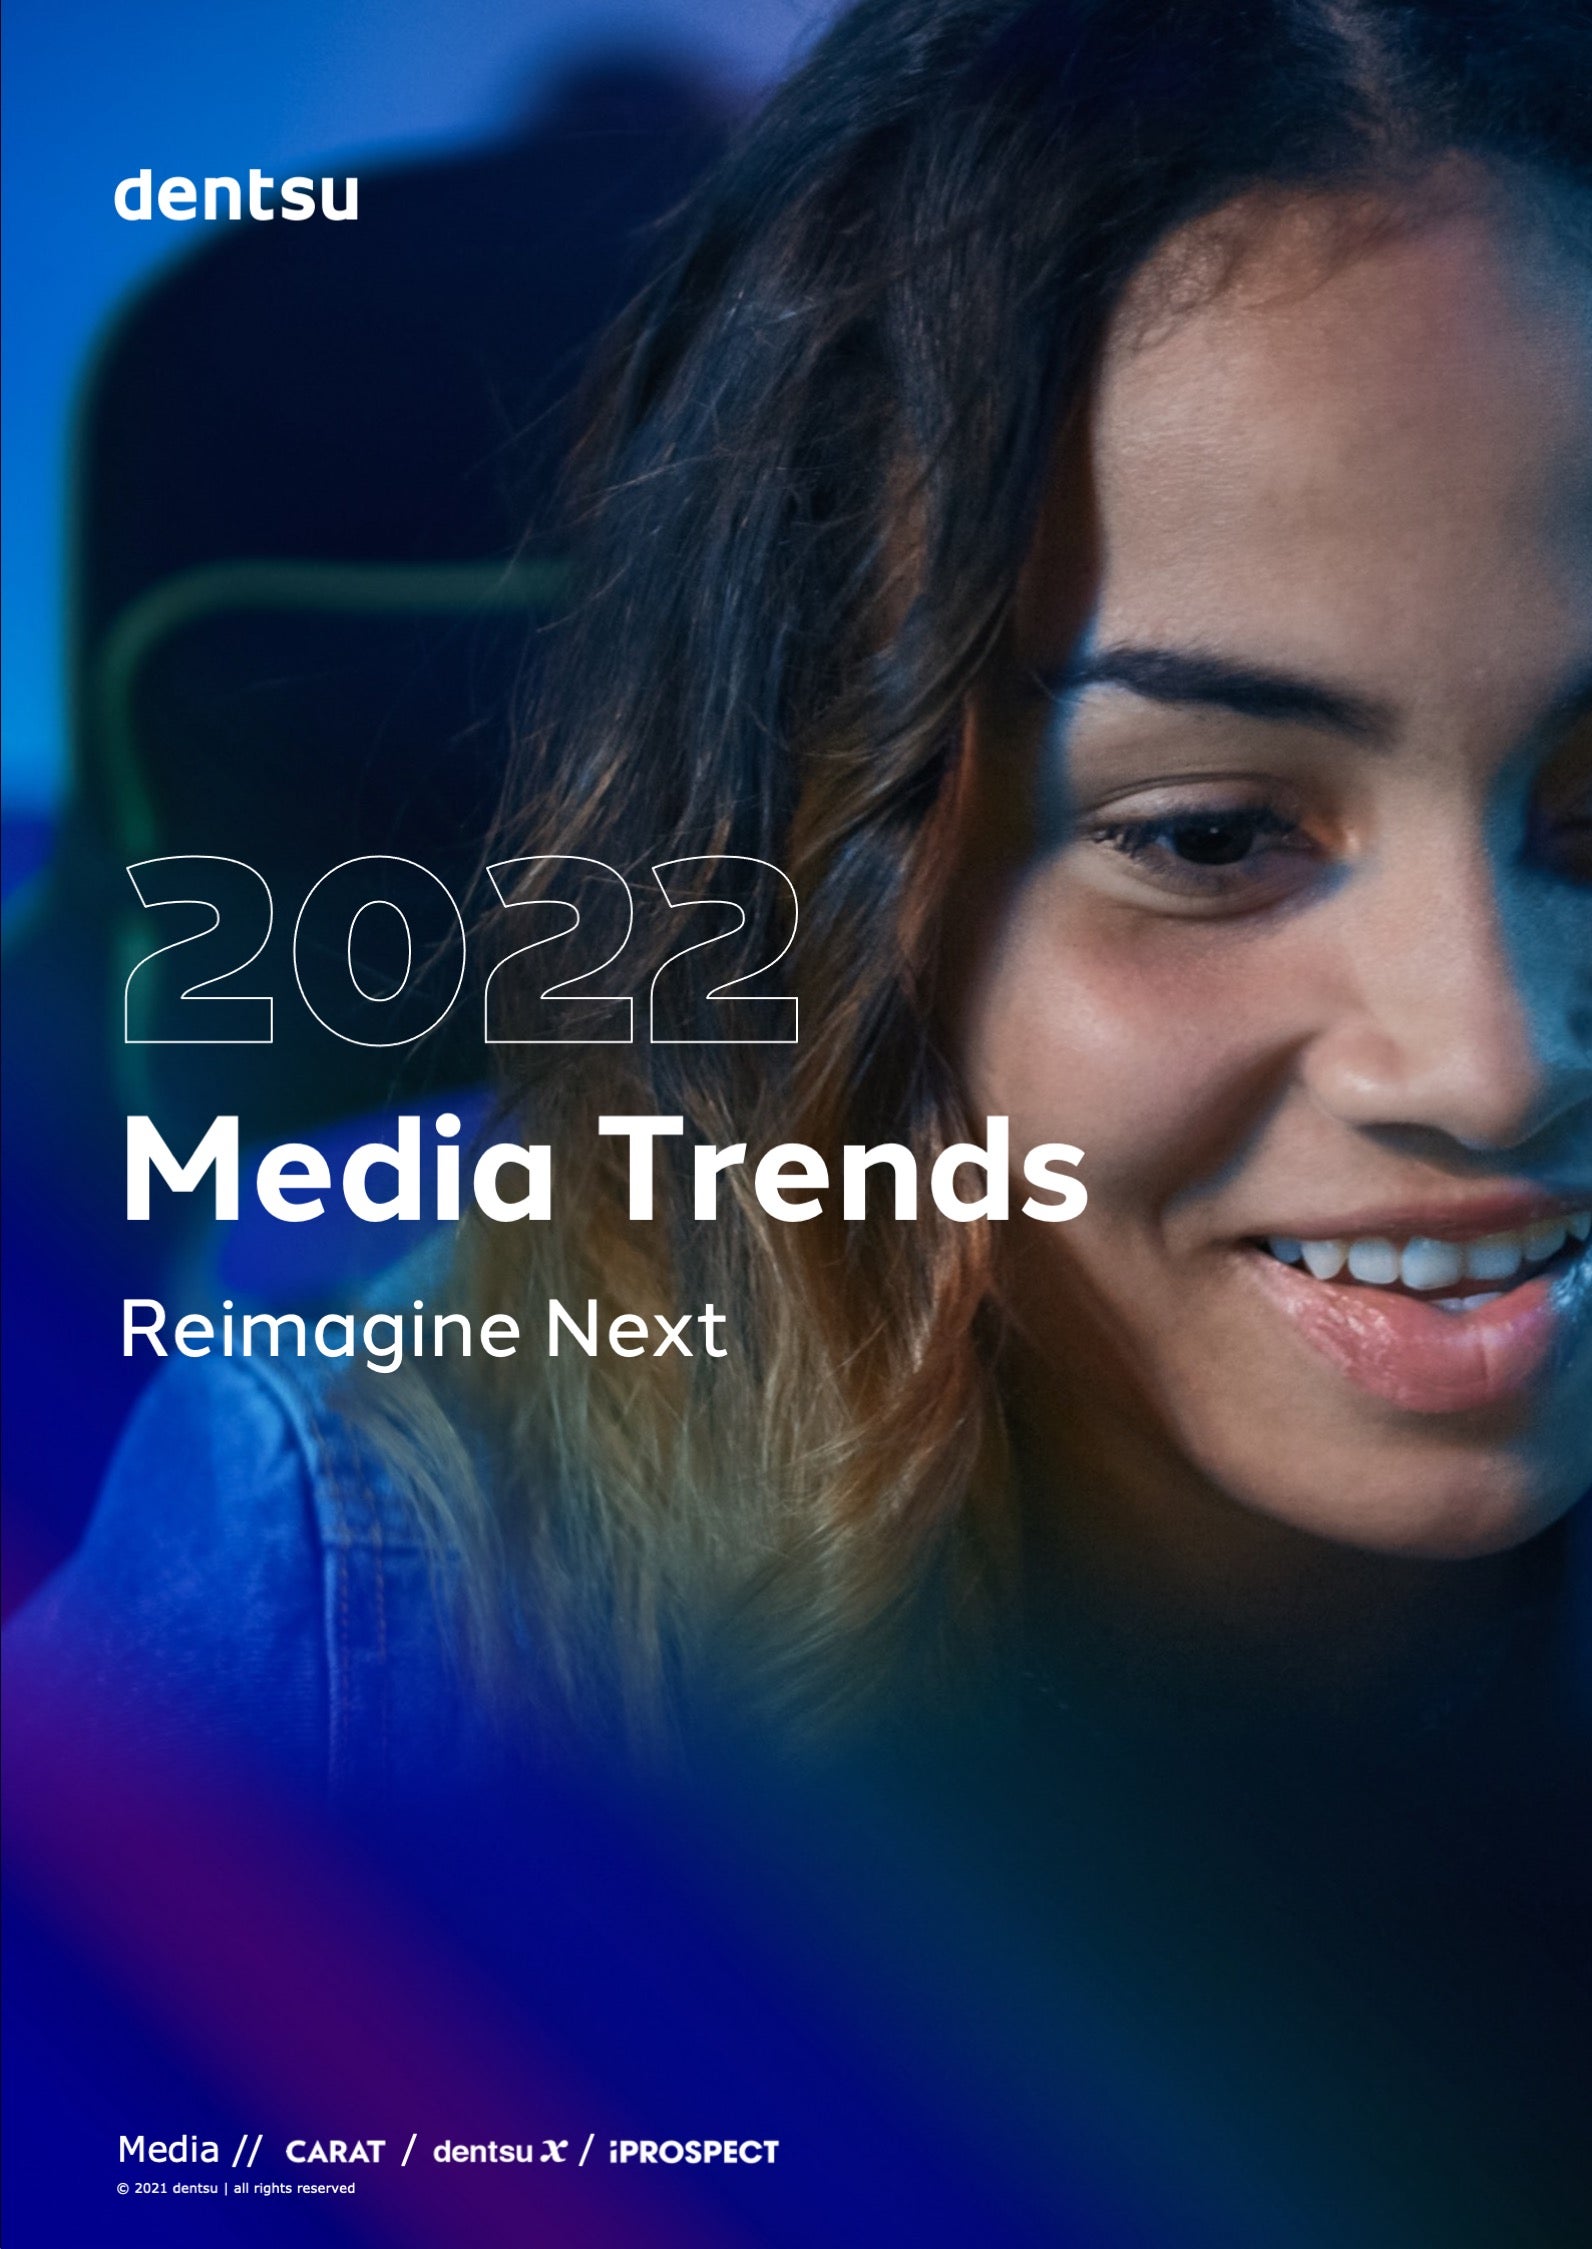 Woman's face with the text '2022 Media Trends'